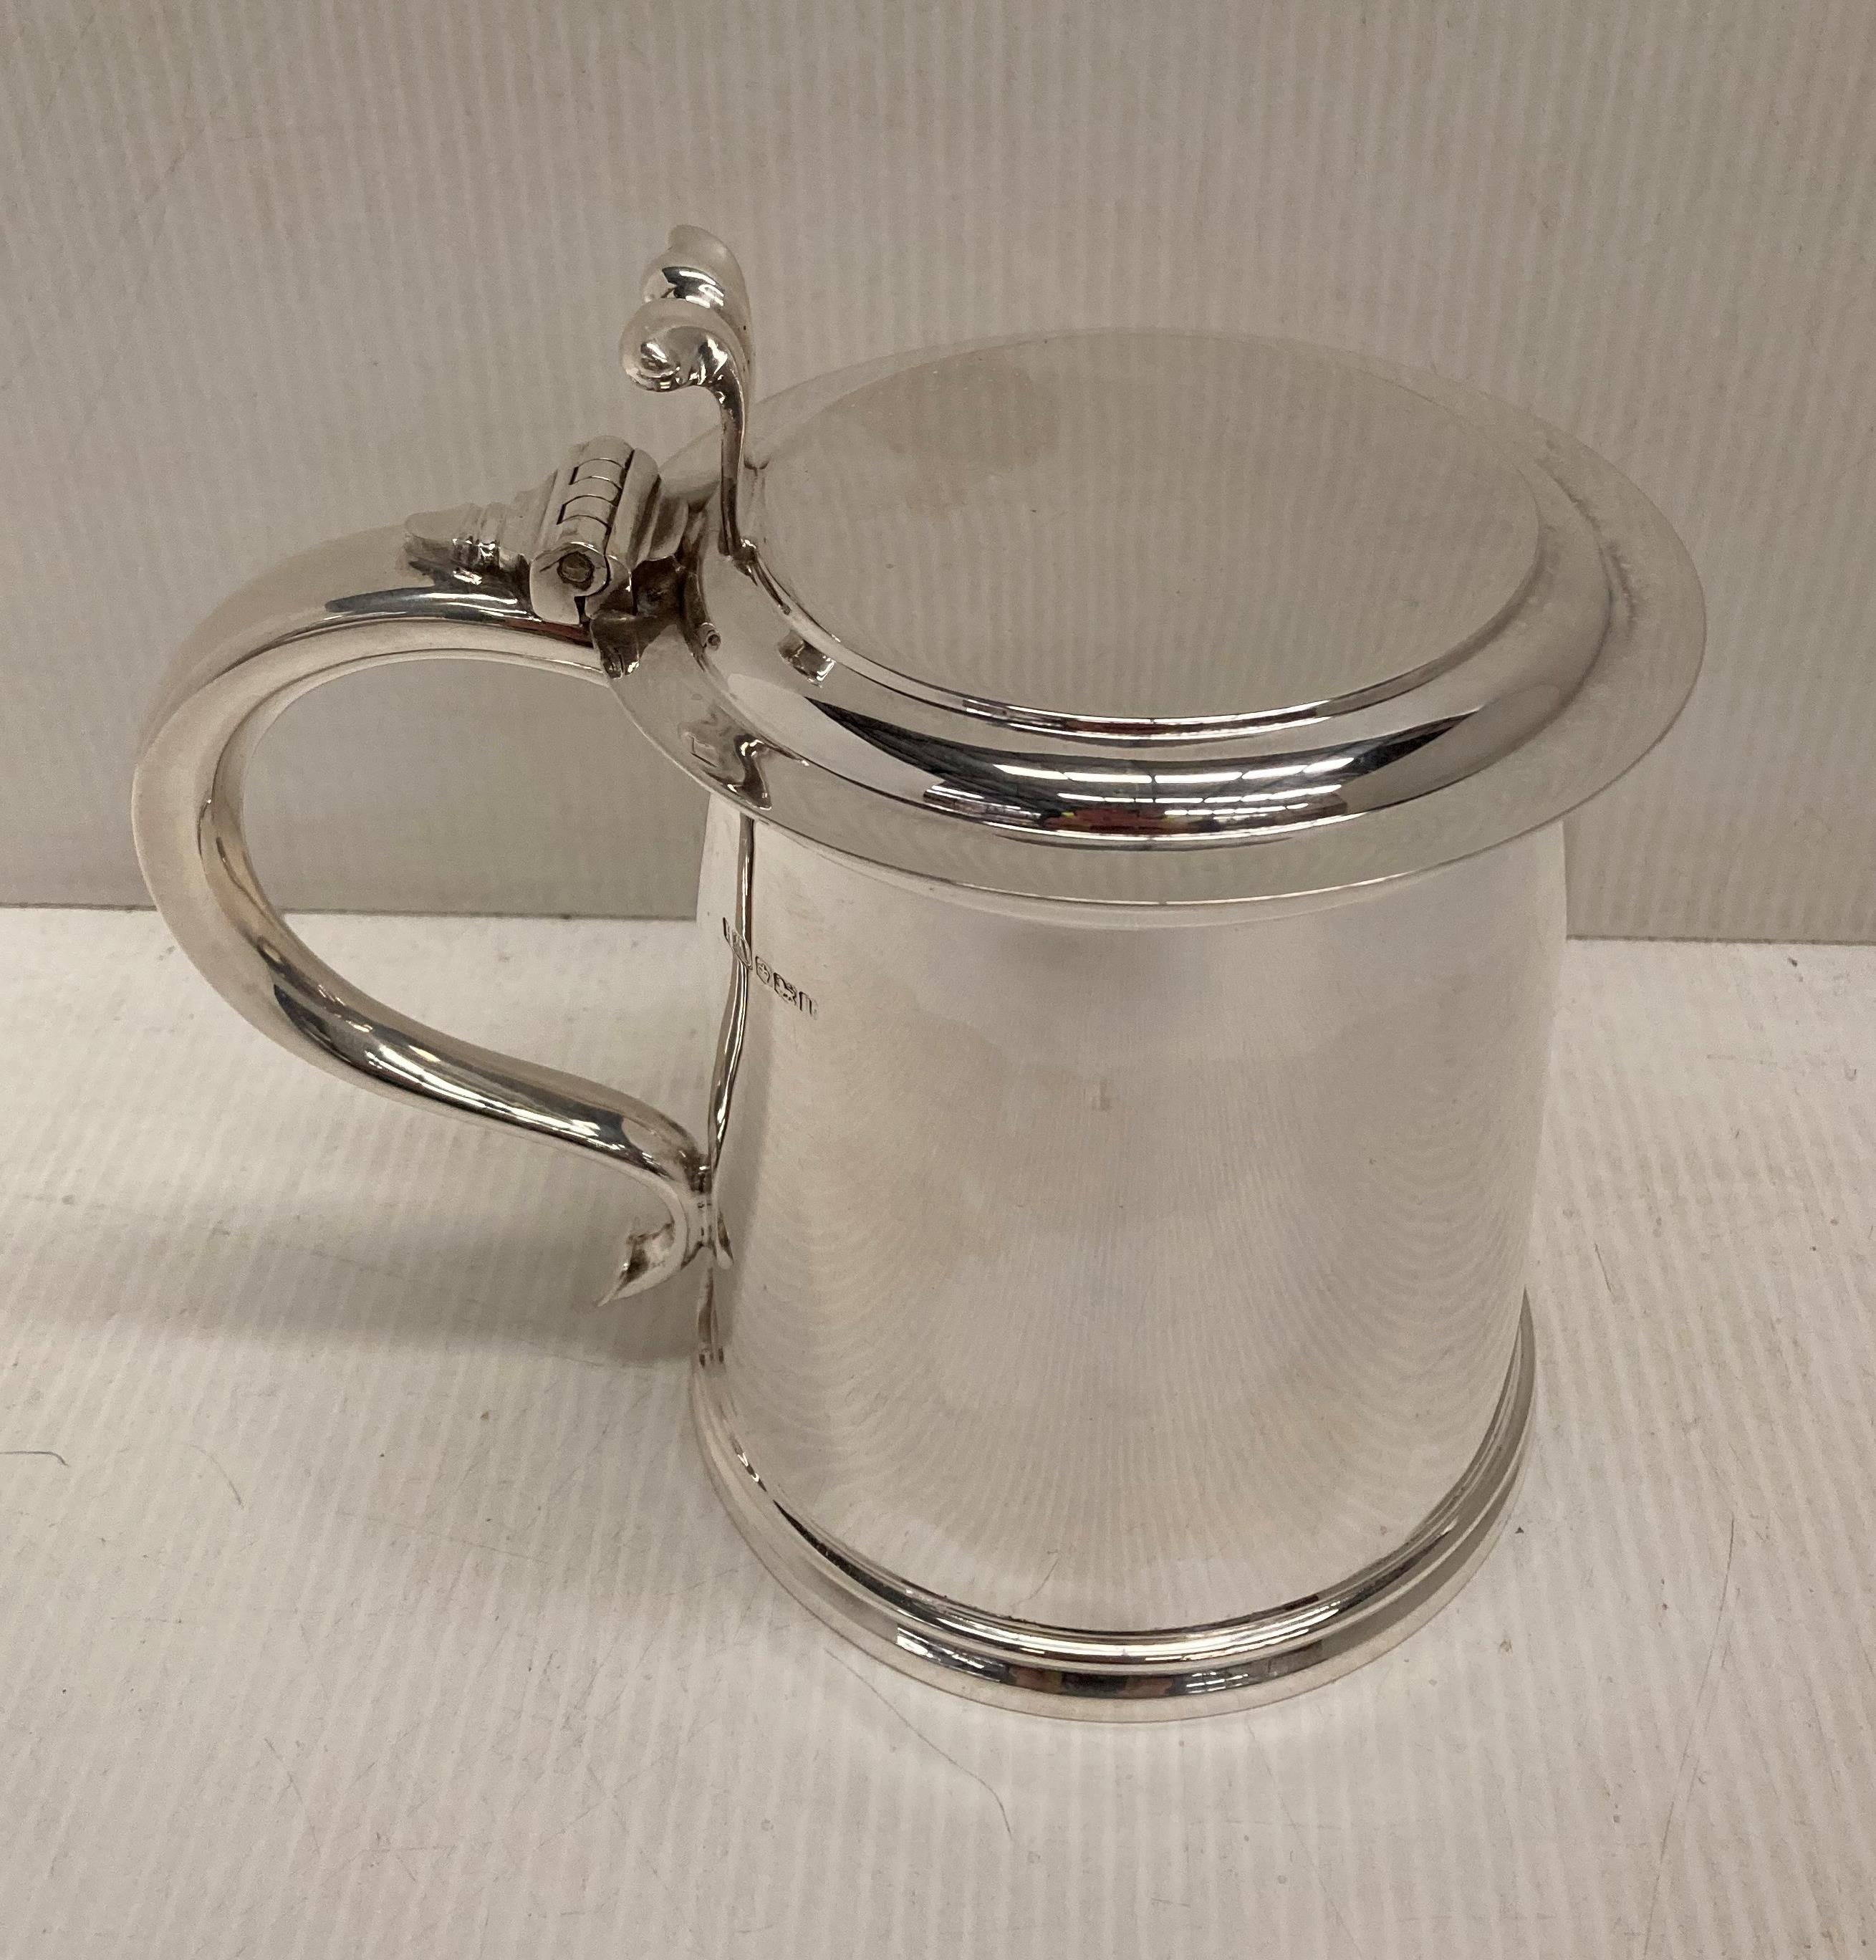 Large 17th Century style flat top tankard by Atkin Bros Sheffield 1928 with plain design and with a - Image 2 of 6